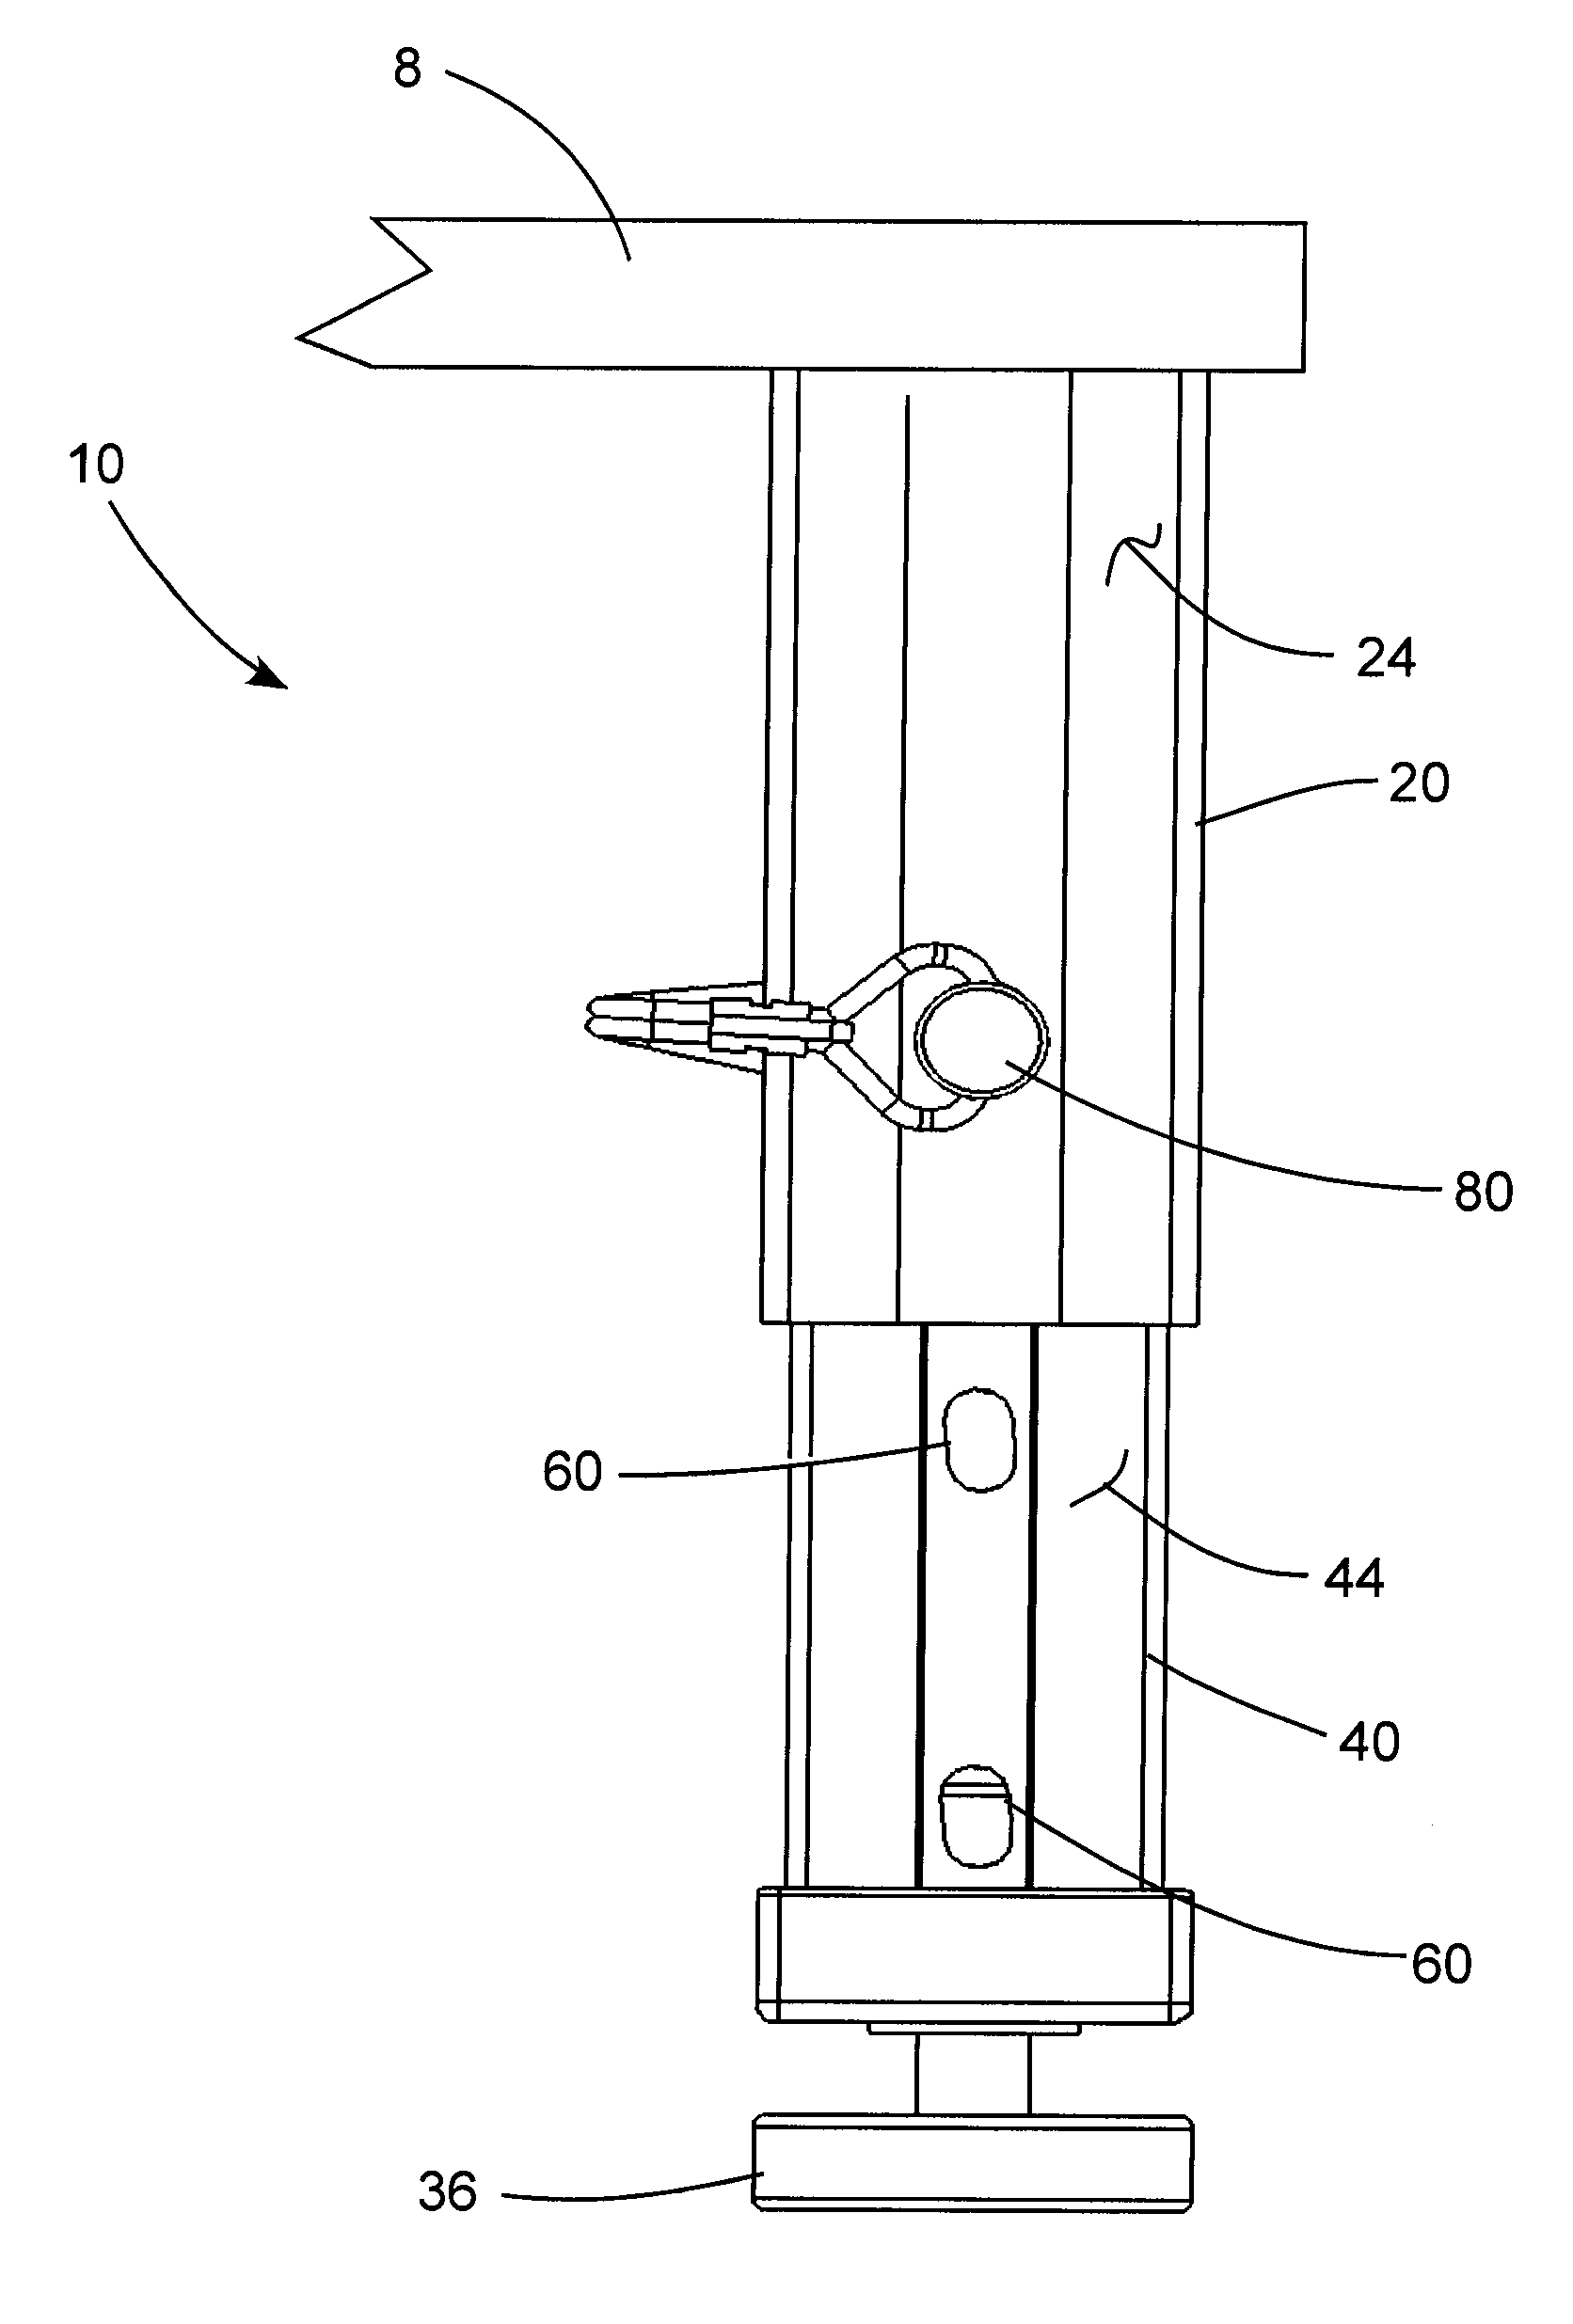 Telescoping Leg Lock and Portable Elevated Platform with Same